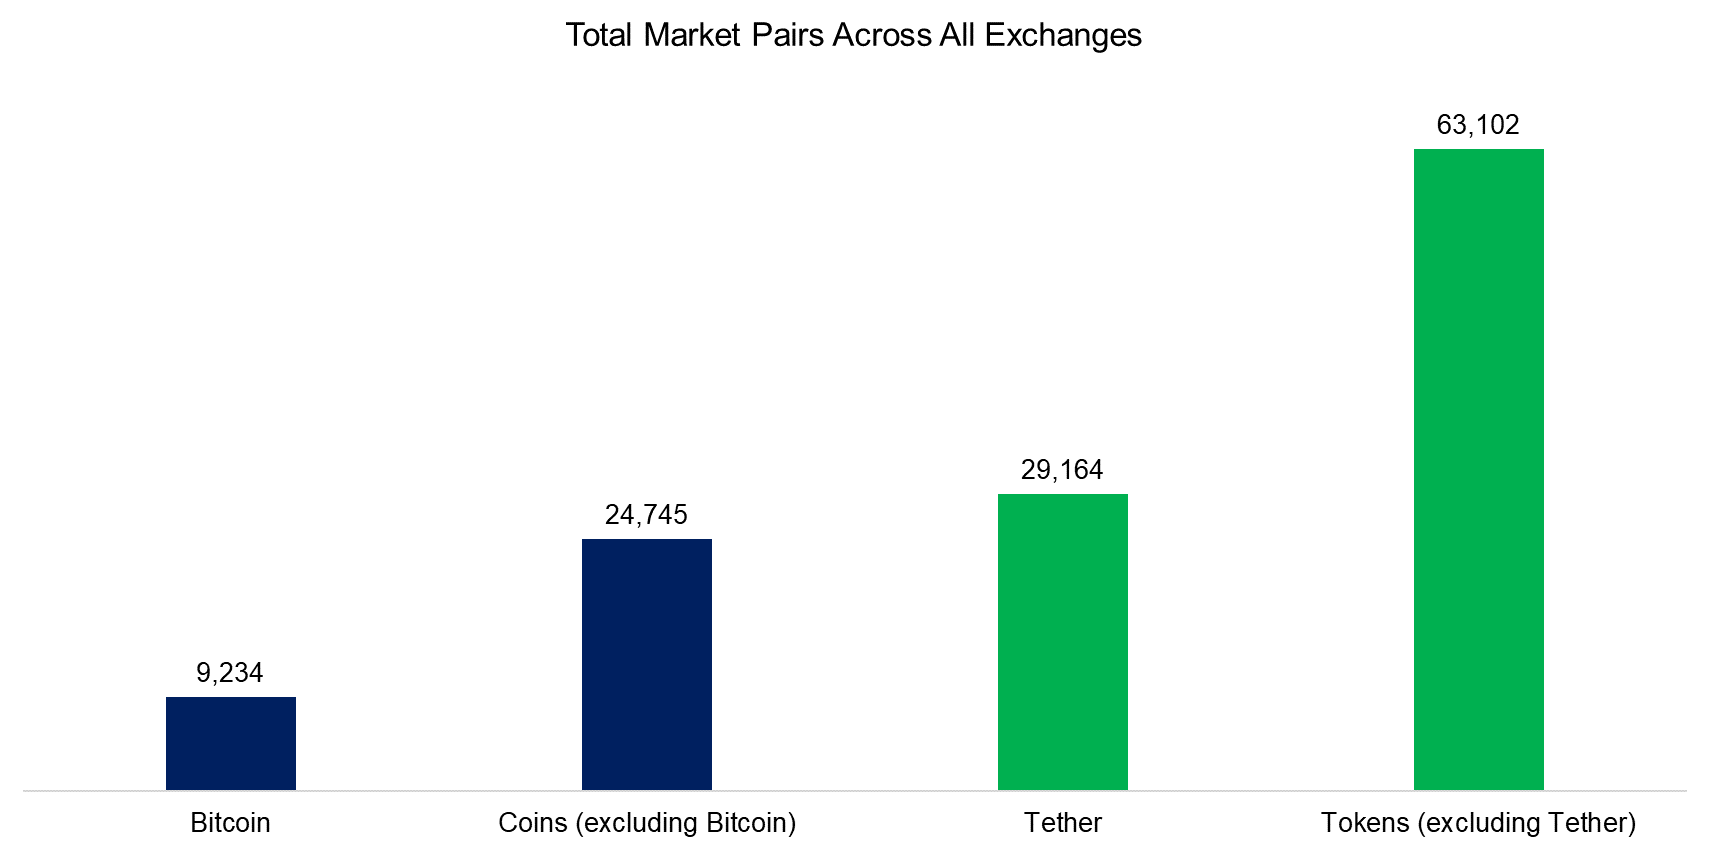 Total Market Pairs Across All Exchanges